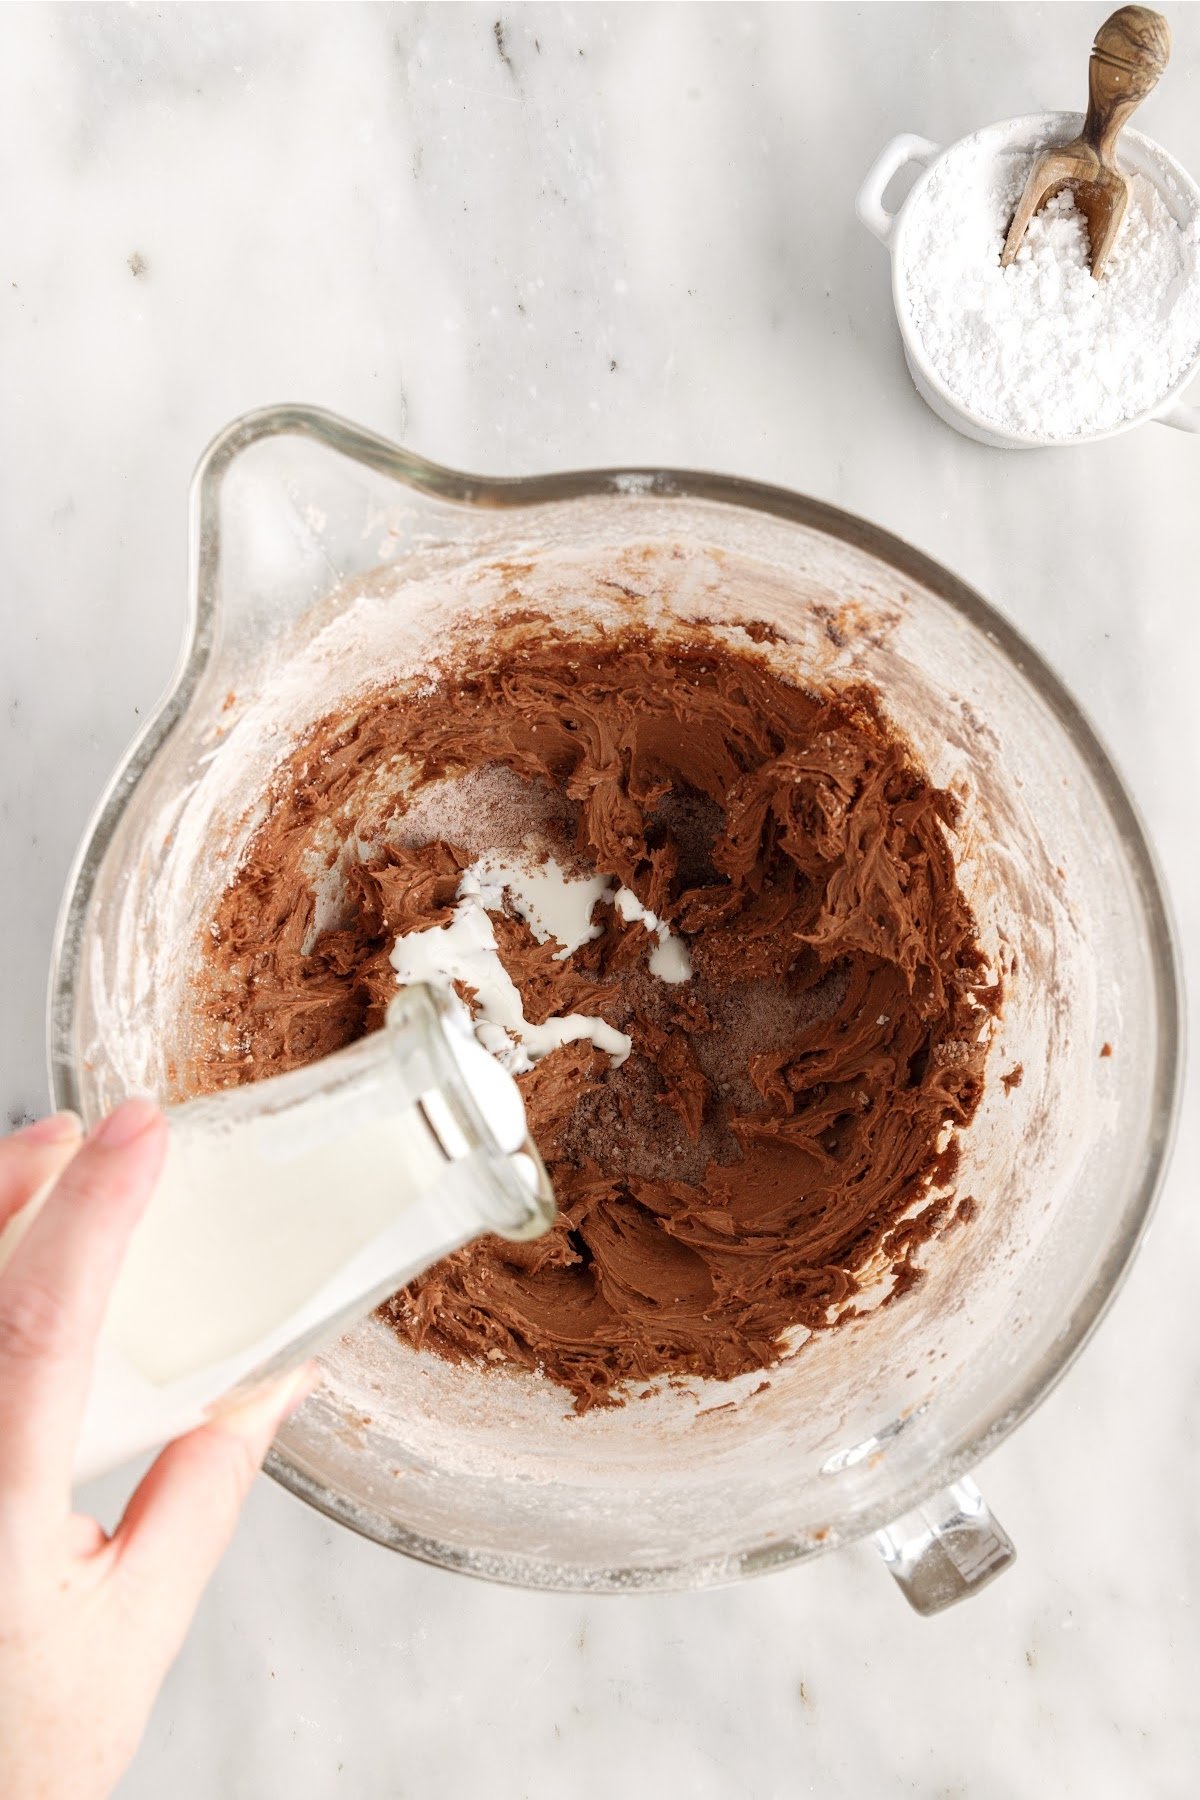 Heavy whipping cream added to cocoa powder mixture.